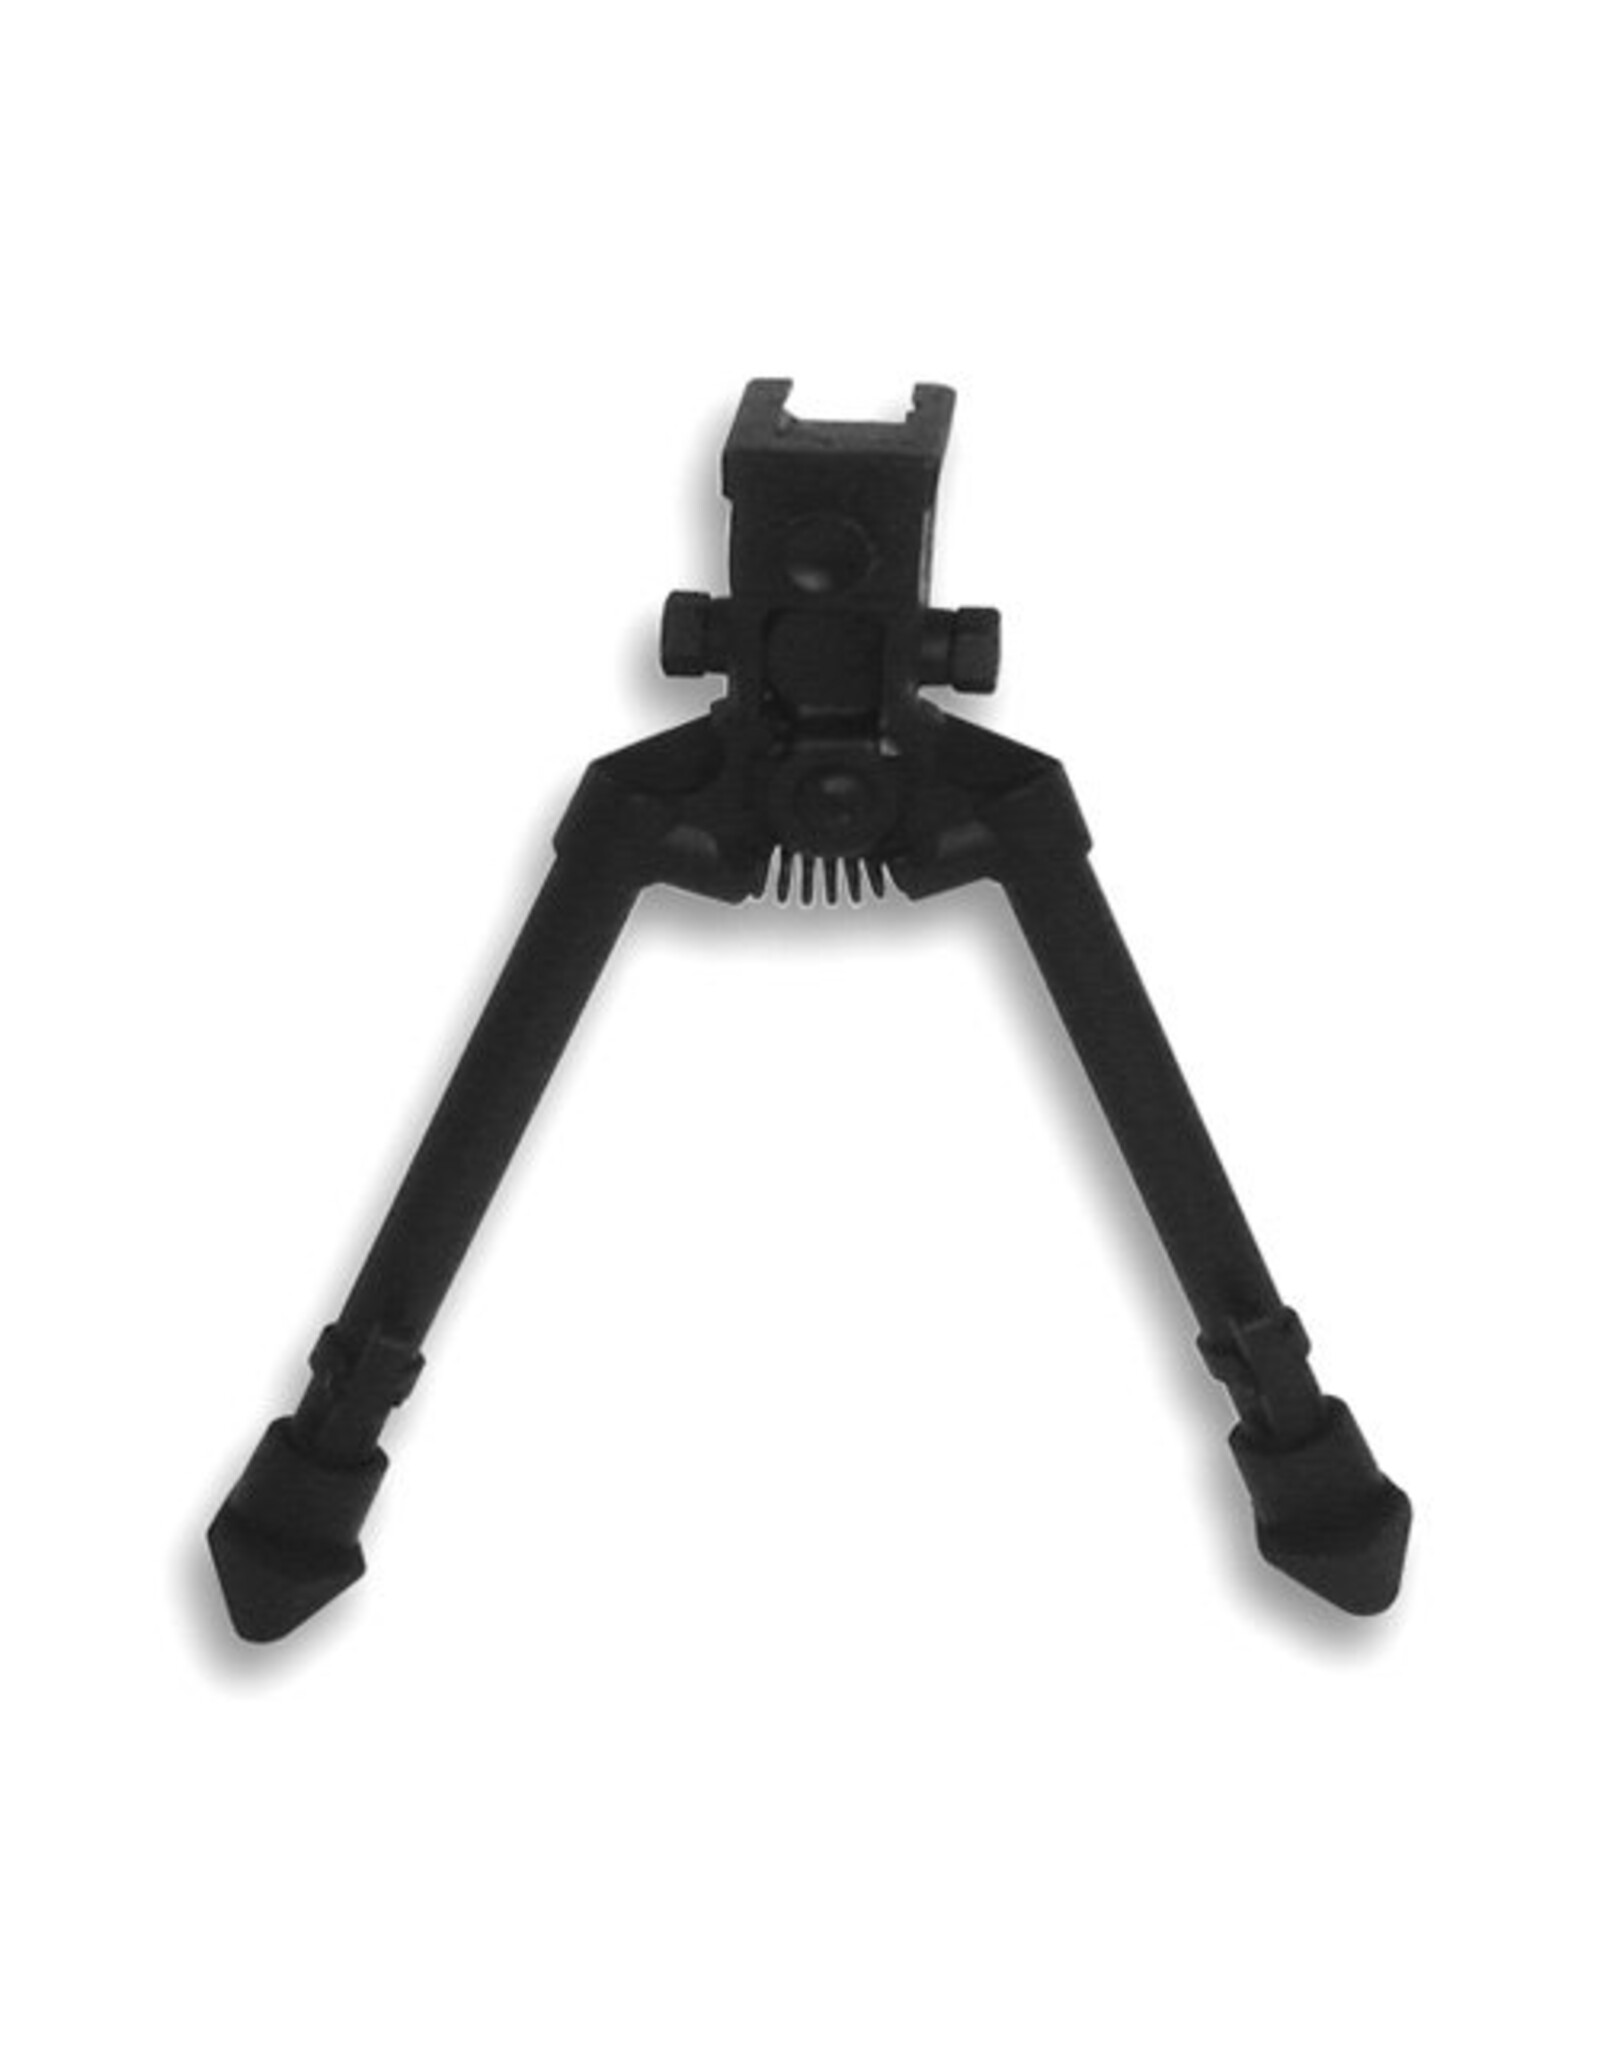 NcStar Bipod with weaver quick release mount/ universal barrel adapter included